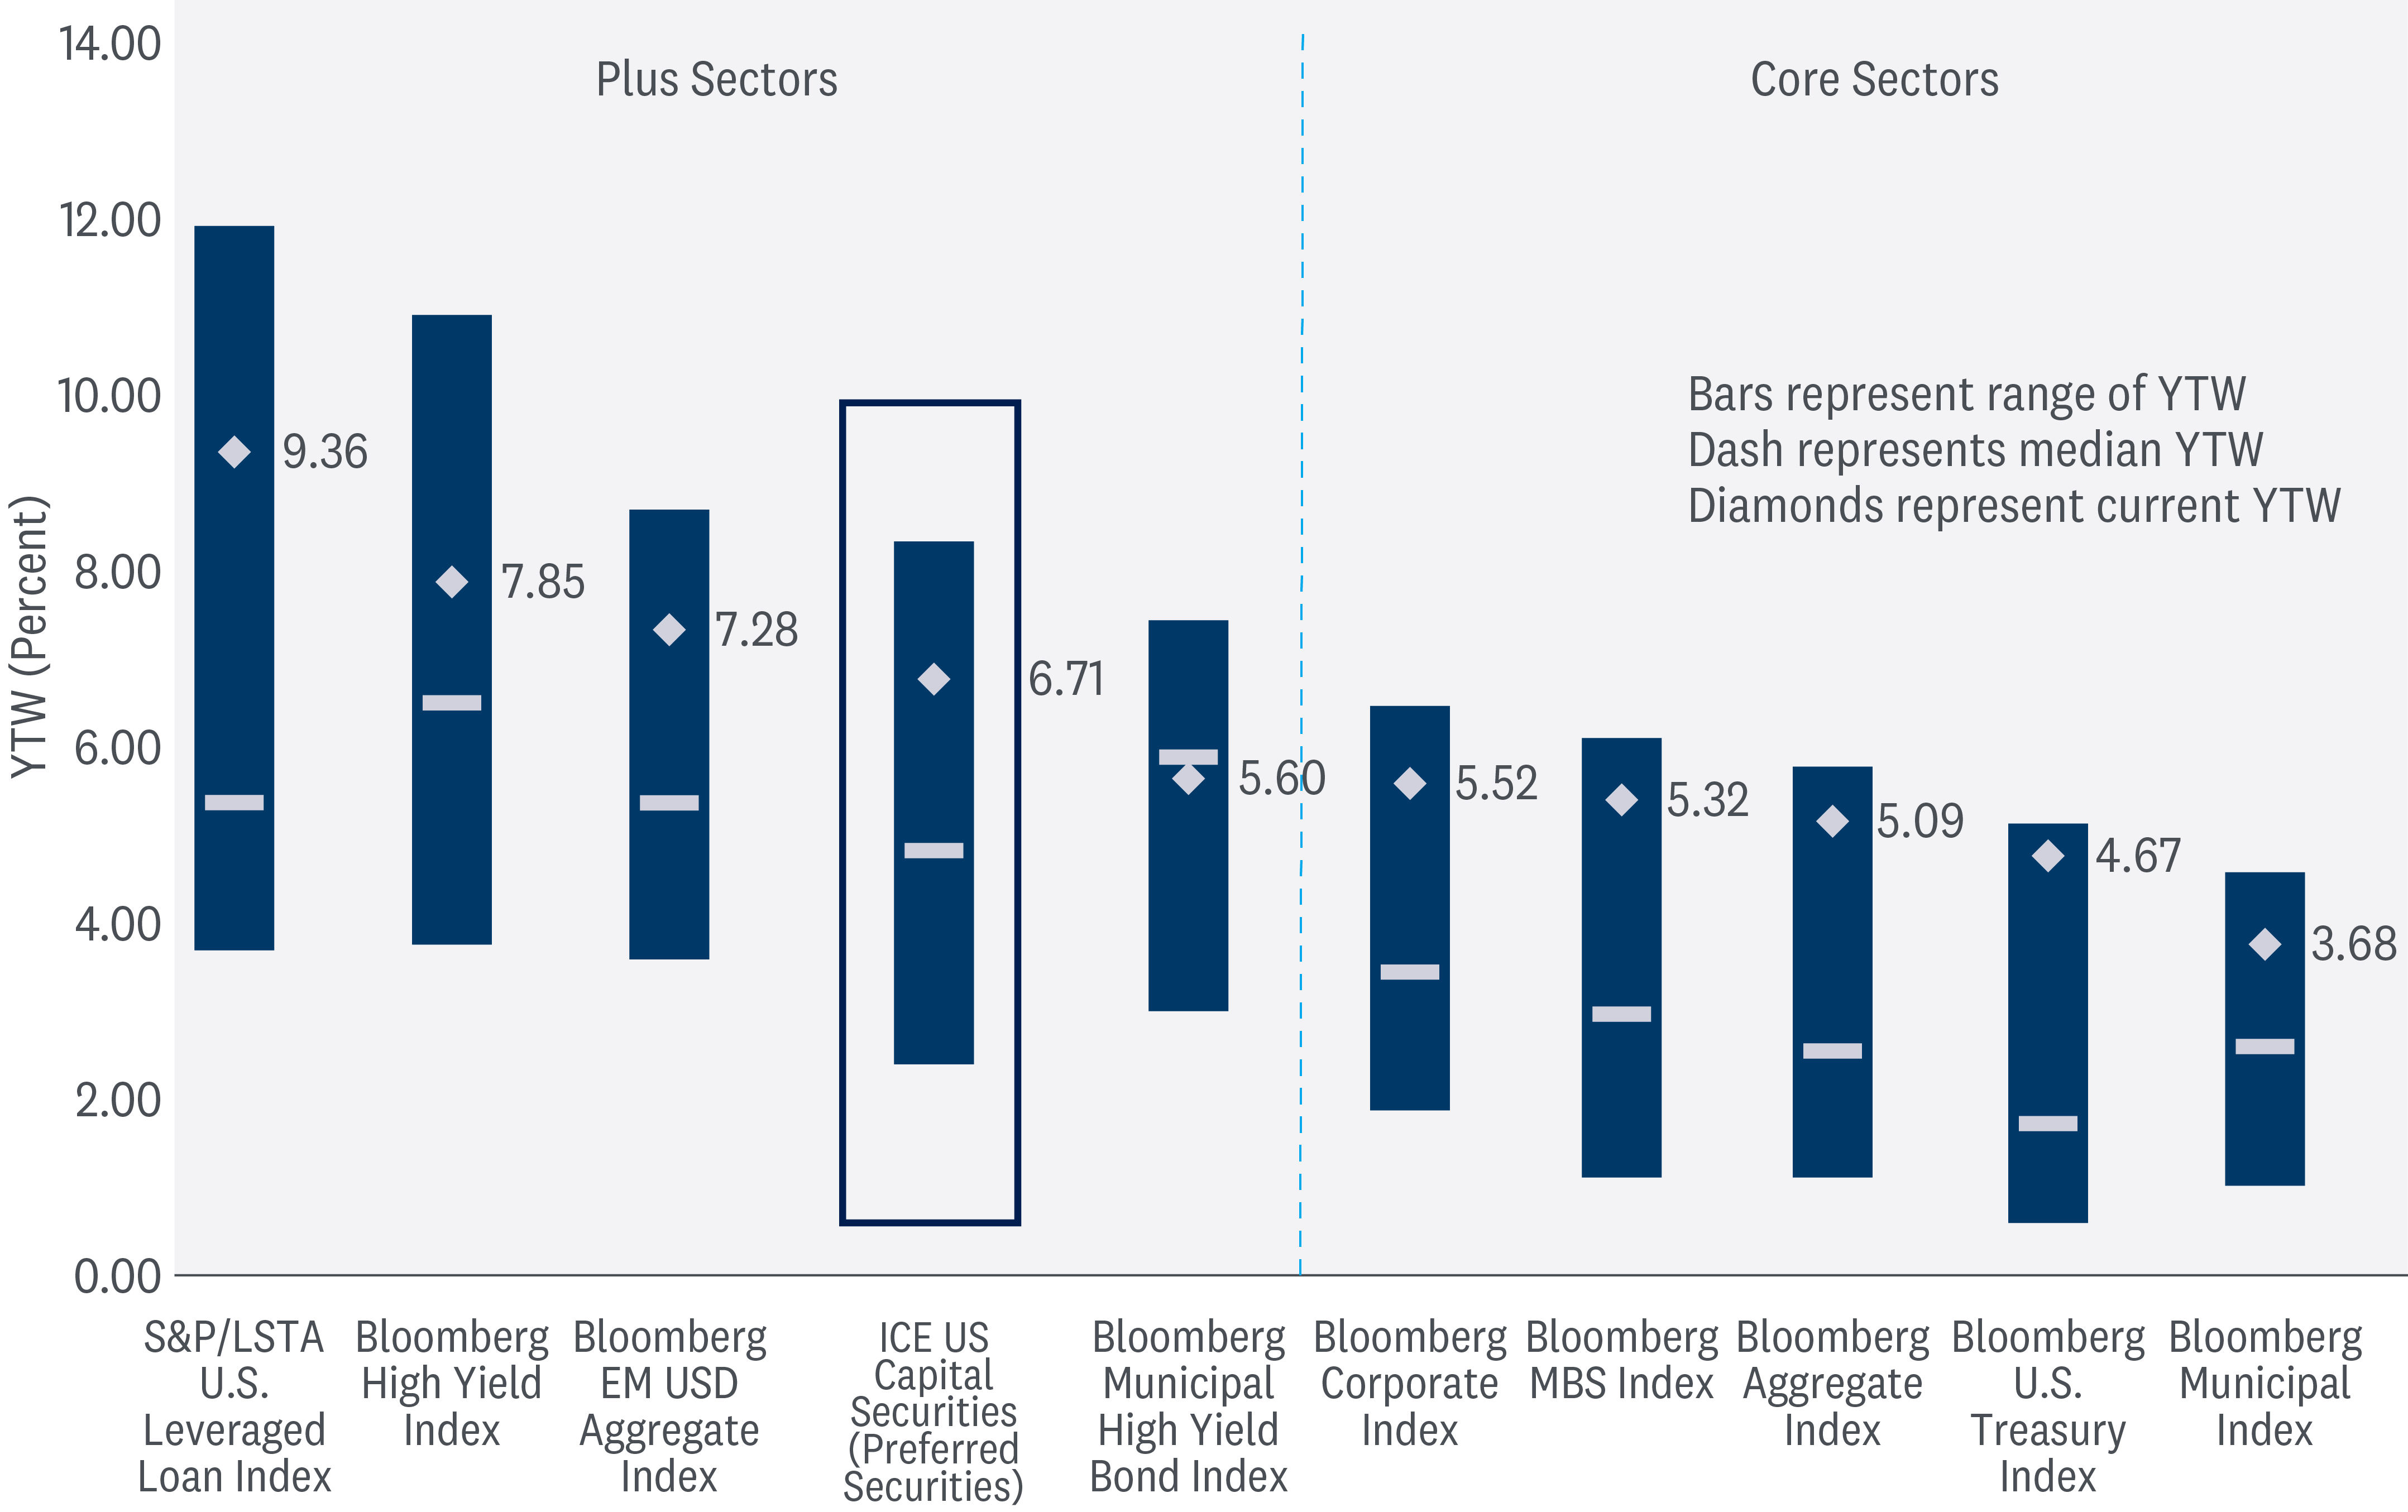 Bar graph of fixed income sectors offering preferred securities with representation of a range of yield-to-worst, median yield-to-worst, and current yield-to-worst data for 10 indexes. 